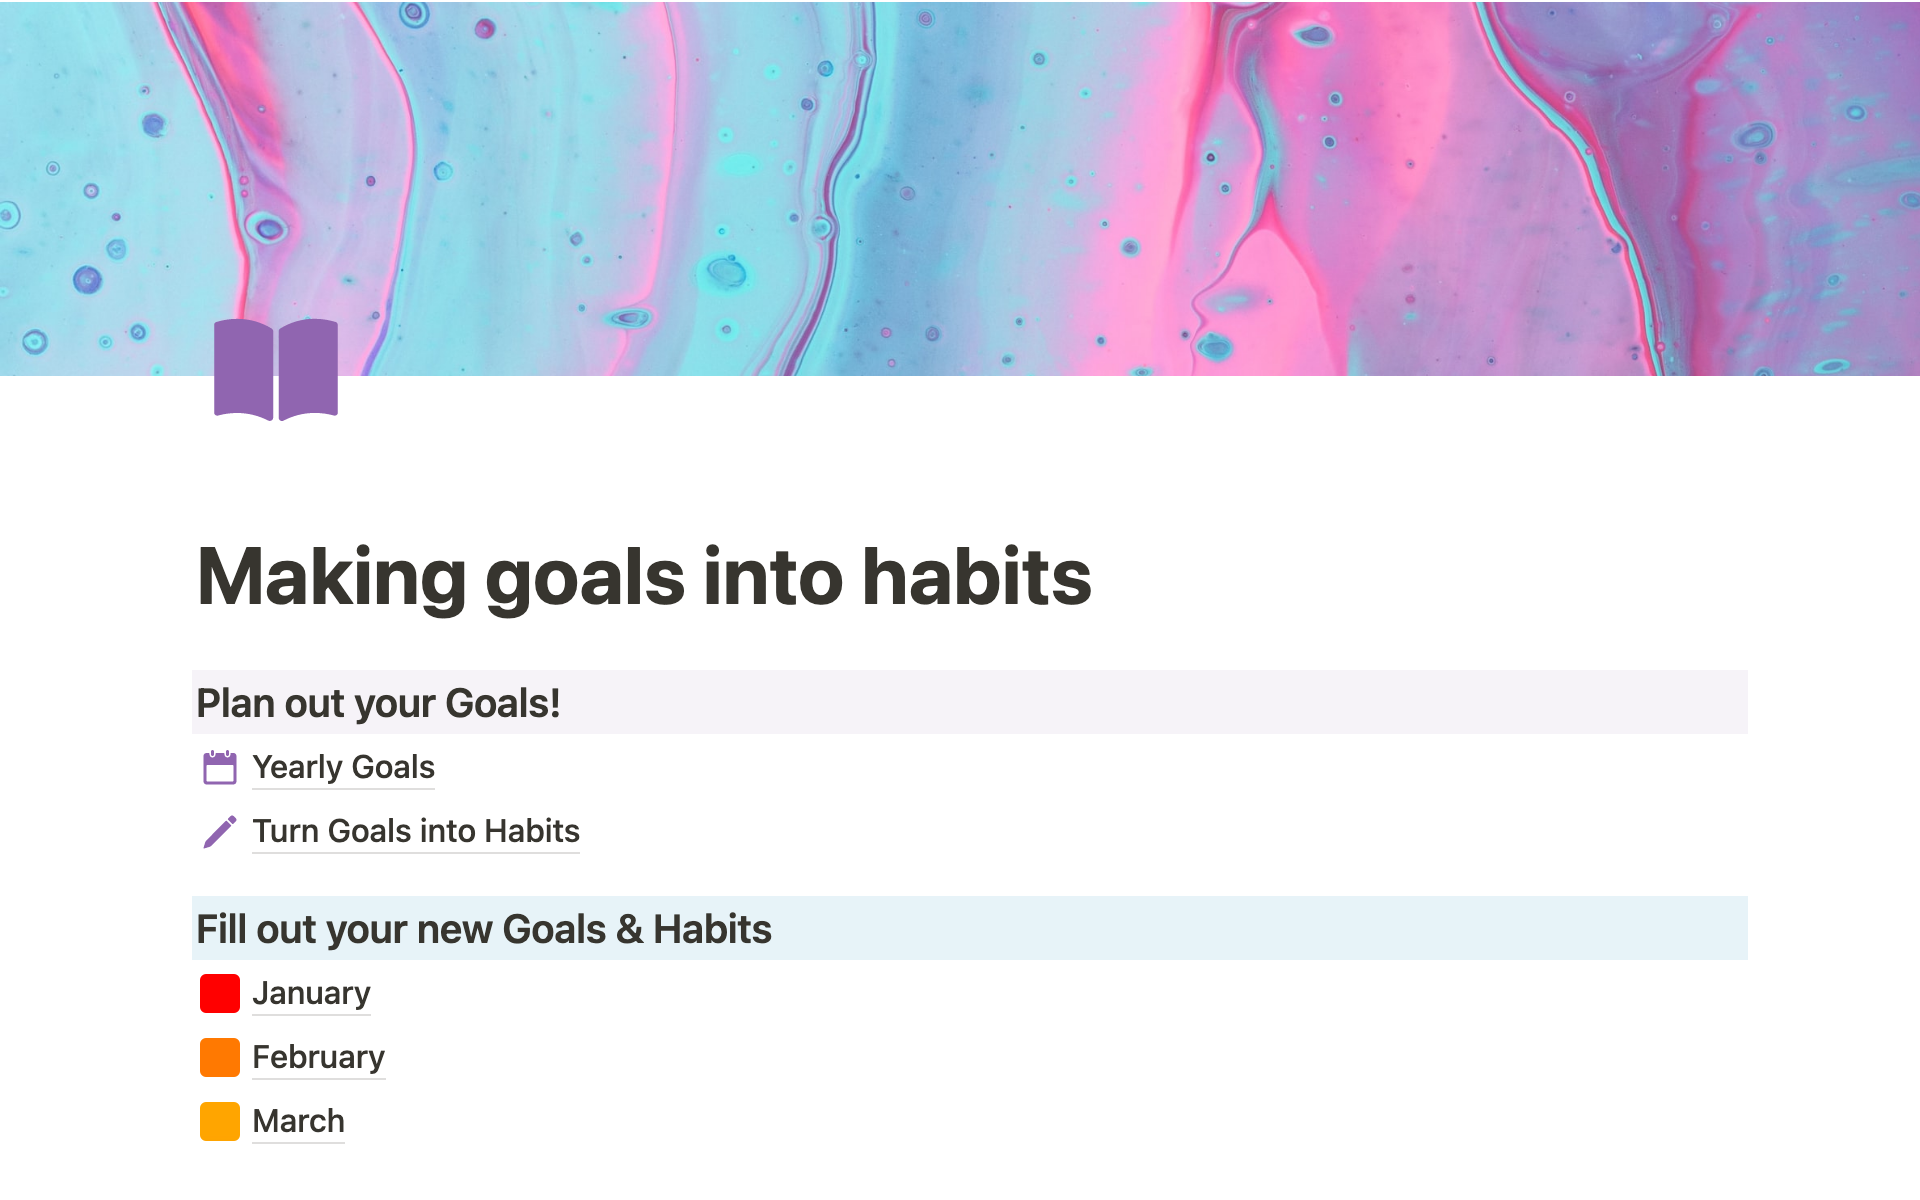 Make large goals into small daily habits.